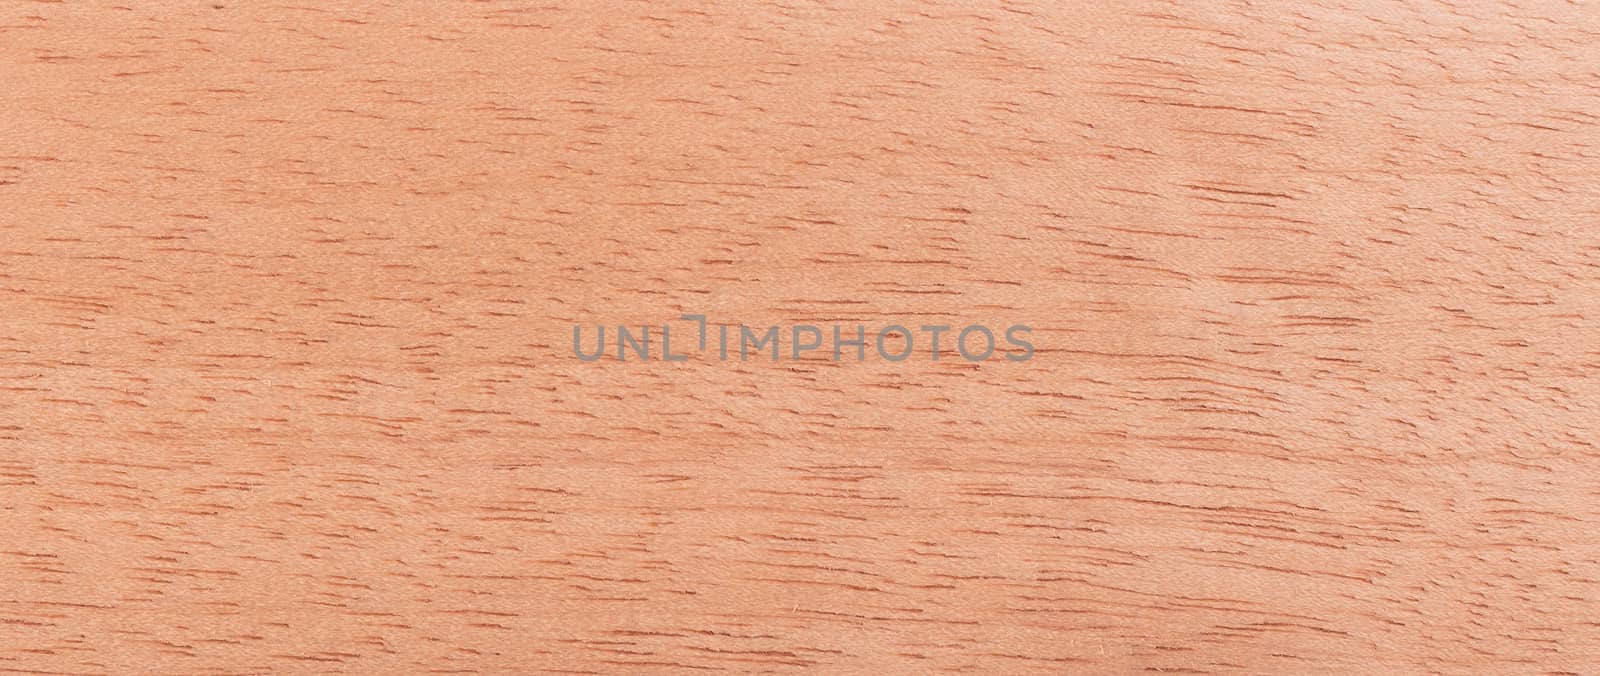 Wood background - Wood from the tropical rainforest - Suriname - Virola surinamensis